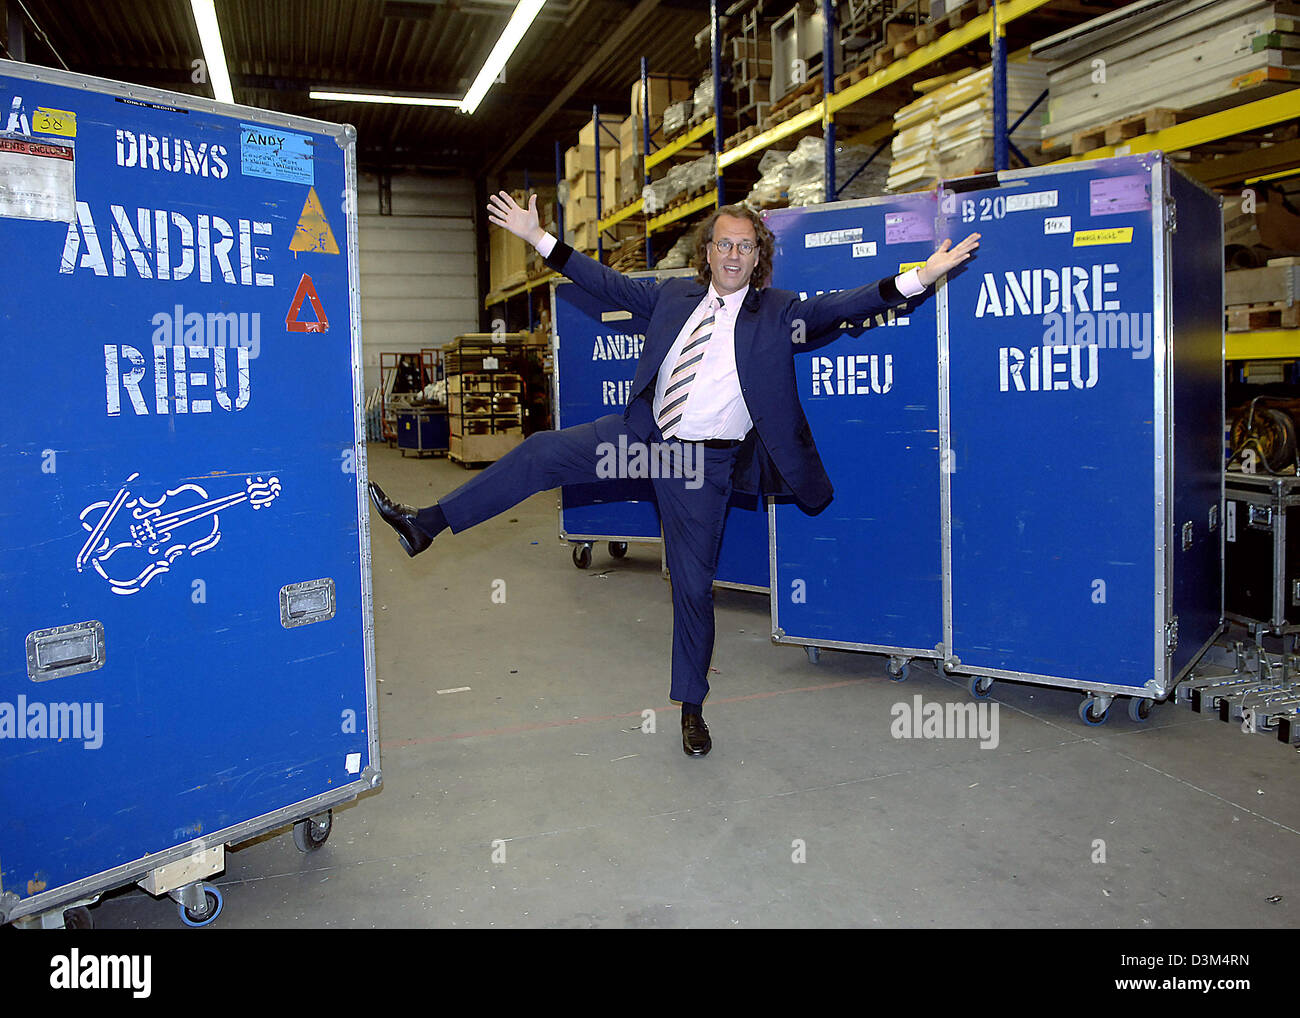 (dpa) - Dutch star violinist Andre Rieu poses jokingly between large containers featuring his name at his warehouse in Maastricht, the Netherlands, 02 November 2005. The 56-year-old musician is about to start the first part of his tour through Canada and the USA, where he will perform at 13 mayor cities. The complete equipment of his crew, which numbers 40 people, was already loade Stock Photo